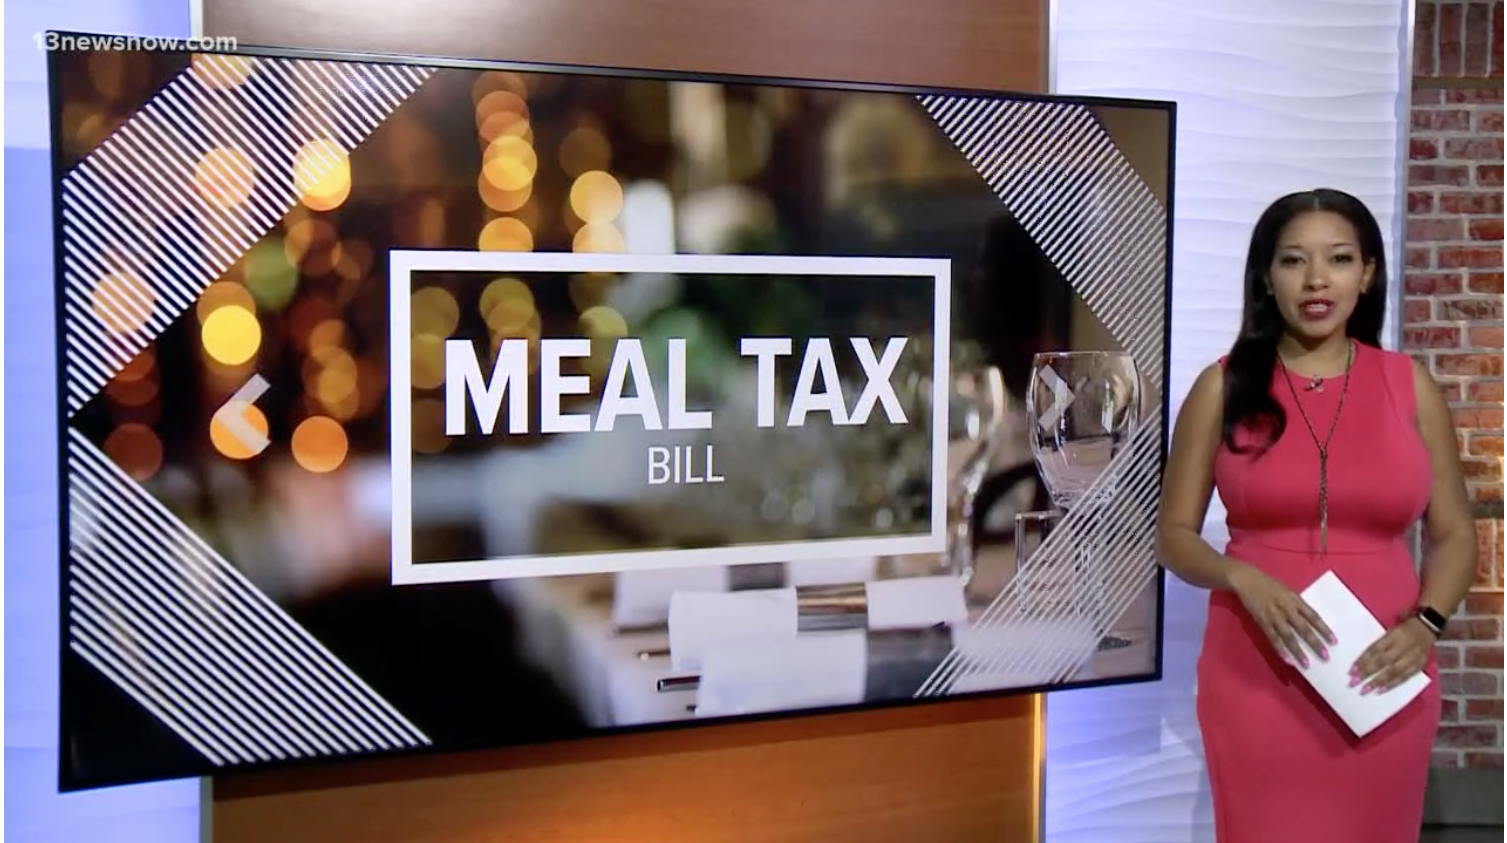 Proposed meal tax bill could 'destroy' jobs, small businesses Rubin